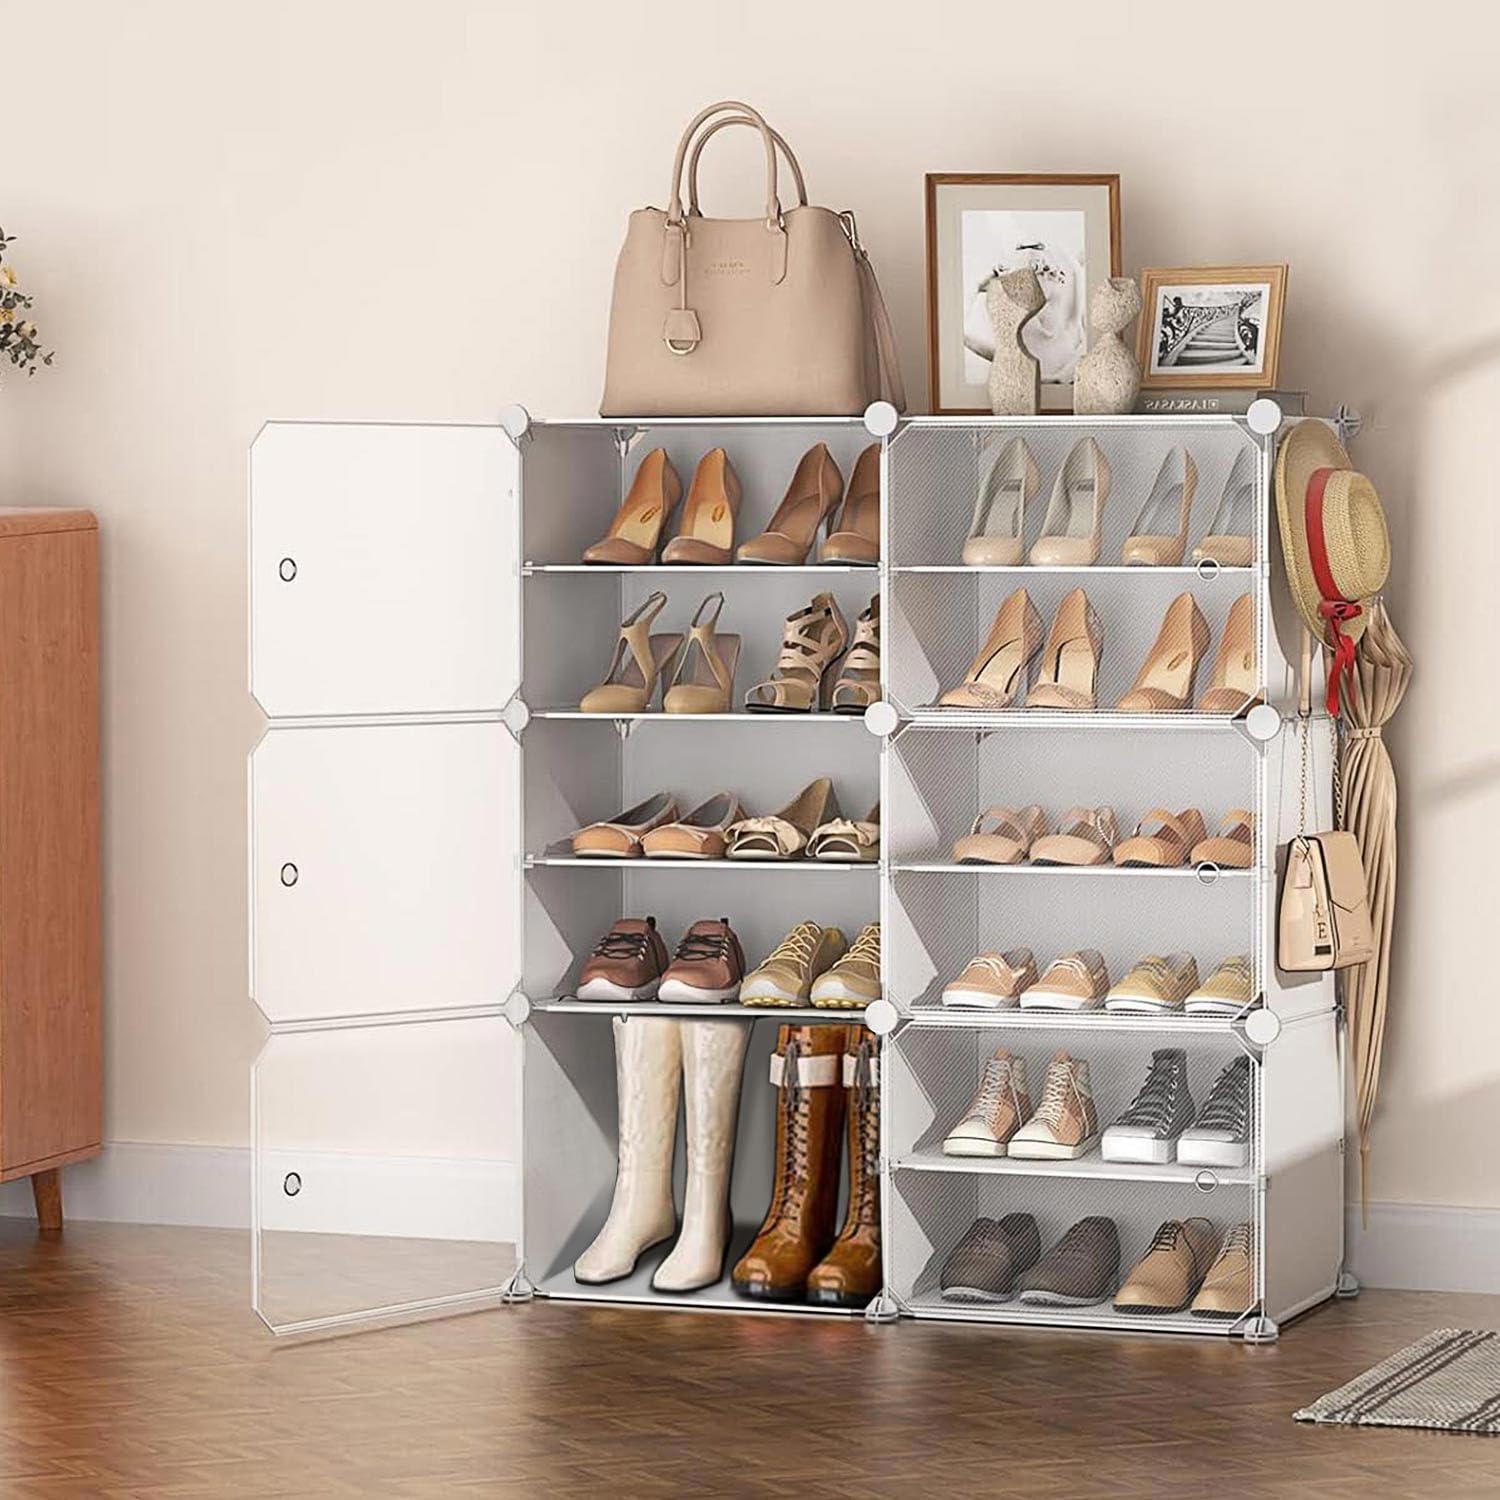 Amazon.com: wdd My First Shoes Display Box : Home & Kitchen